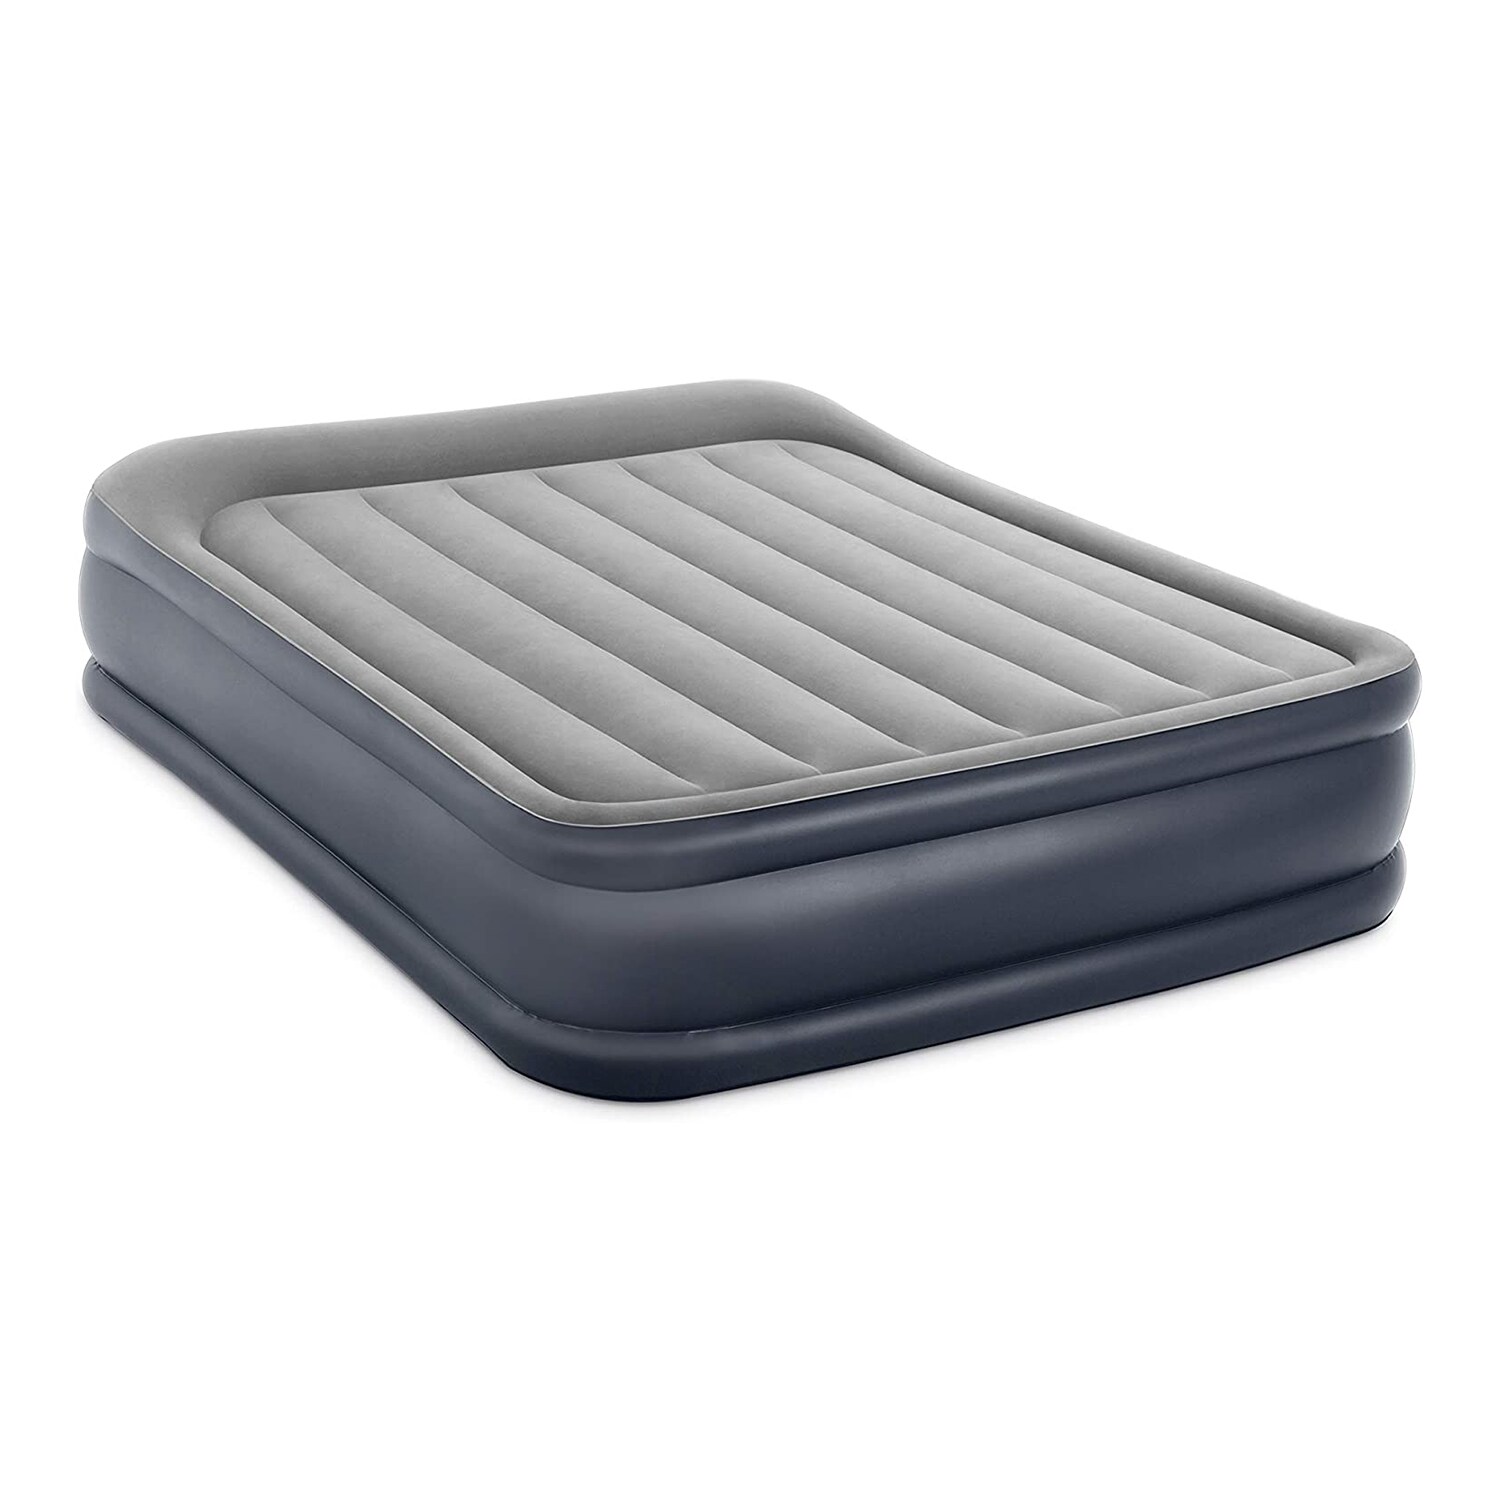 Intex Pillow Rest Single Airbed Air bed with Built-in pump #66706 